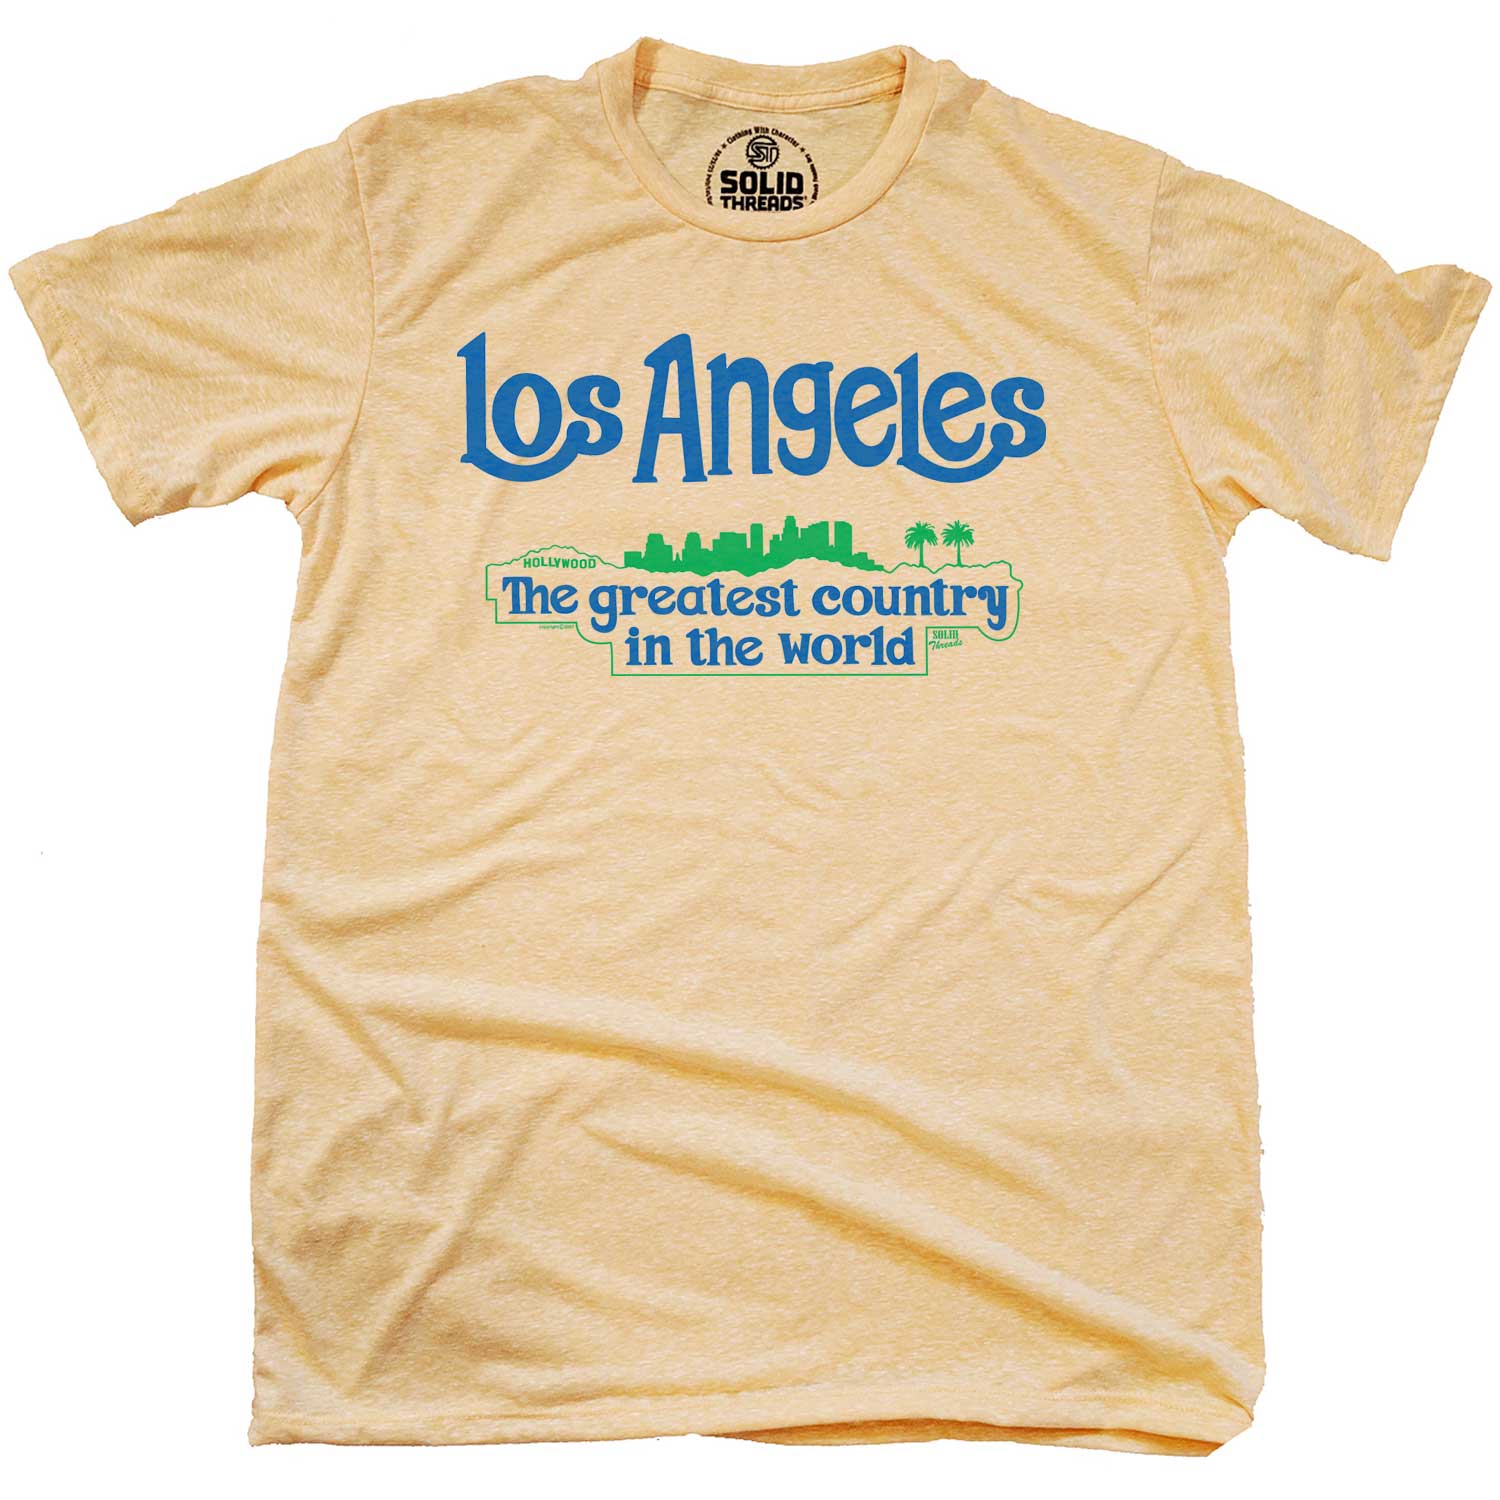 Los Angeles Greatest Country Retro T-shirt, Funny California Graphic Tee